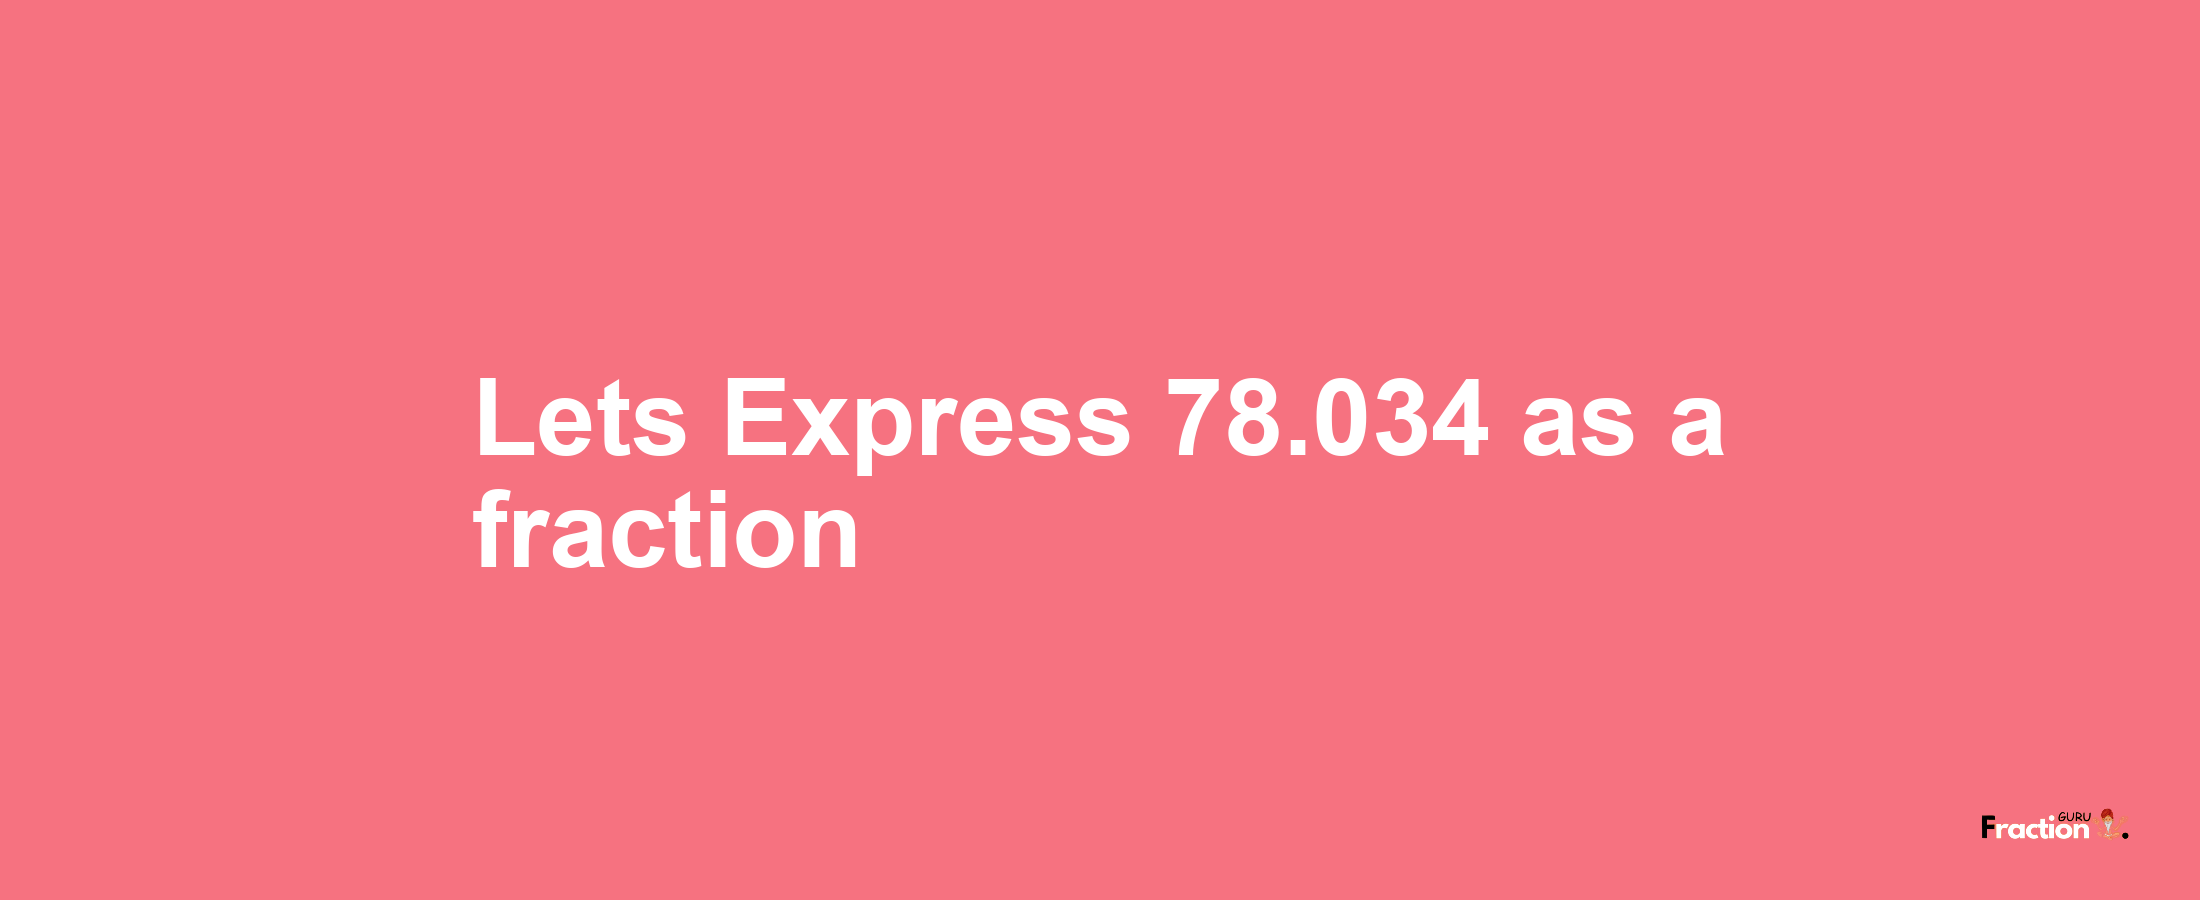 Lets Express 78.034 as afraction